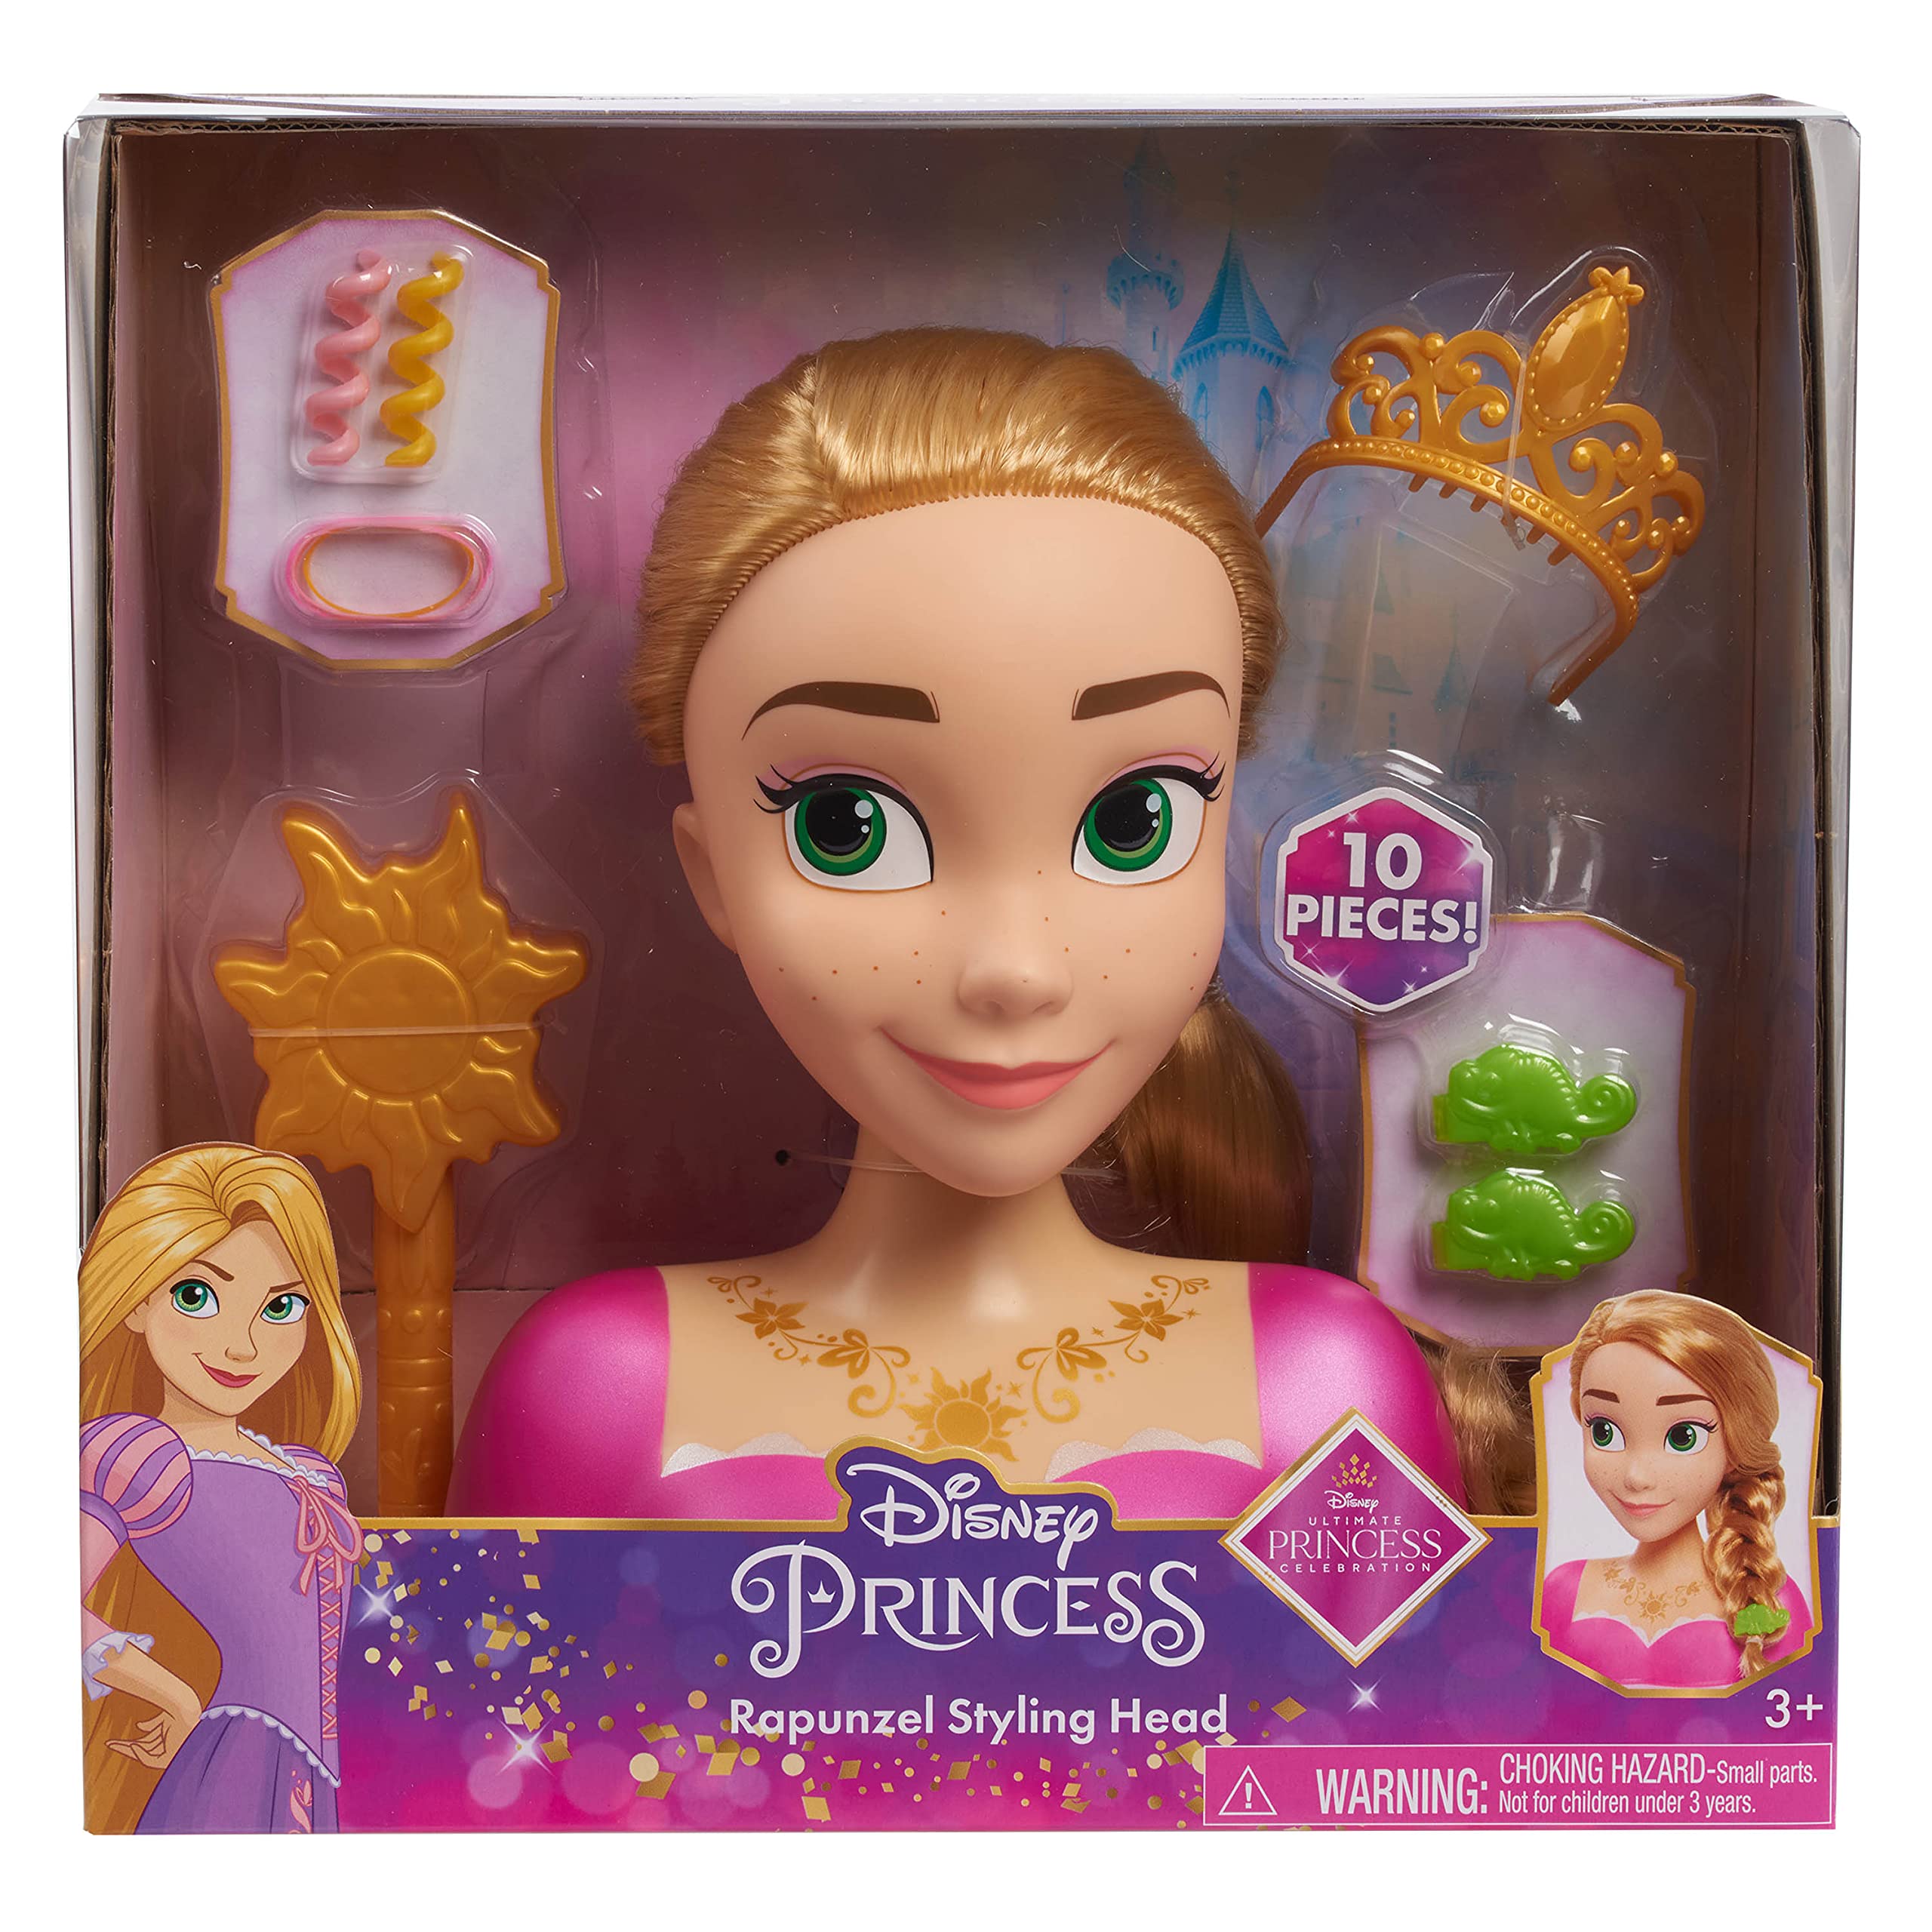 Disney Princess Rapunzel Styling Head, Blonde Hair, 10 Piece Pretend Play Set, Tangled, by Just Play Basic Rapunzel Styling Head Multi-color